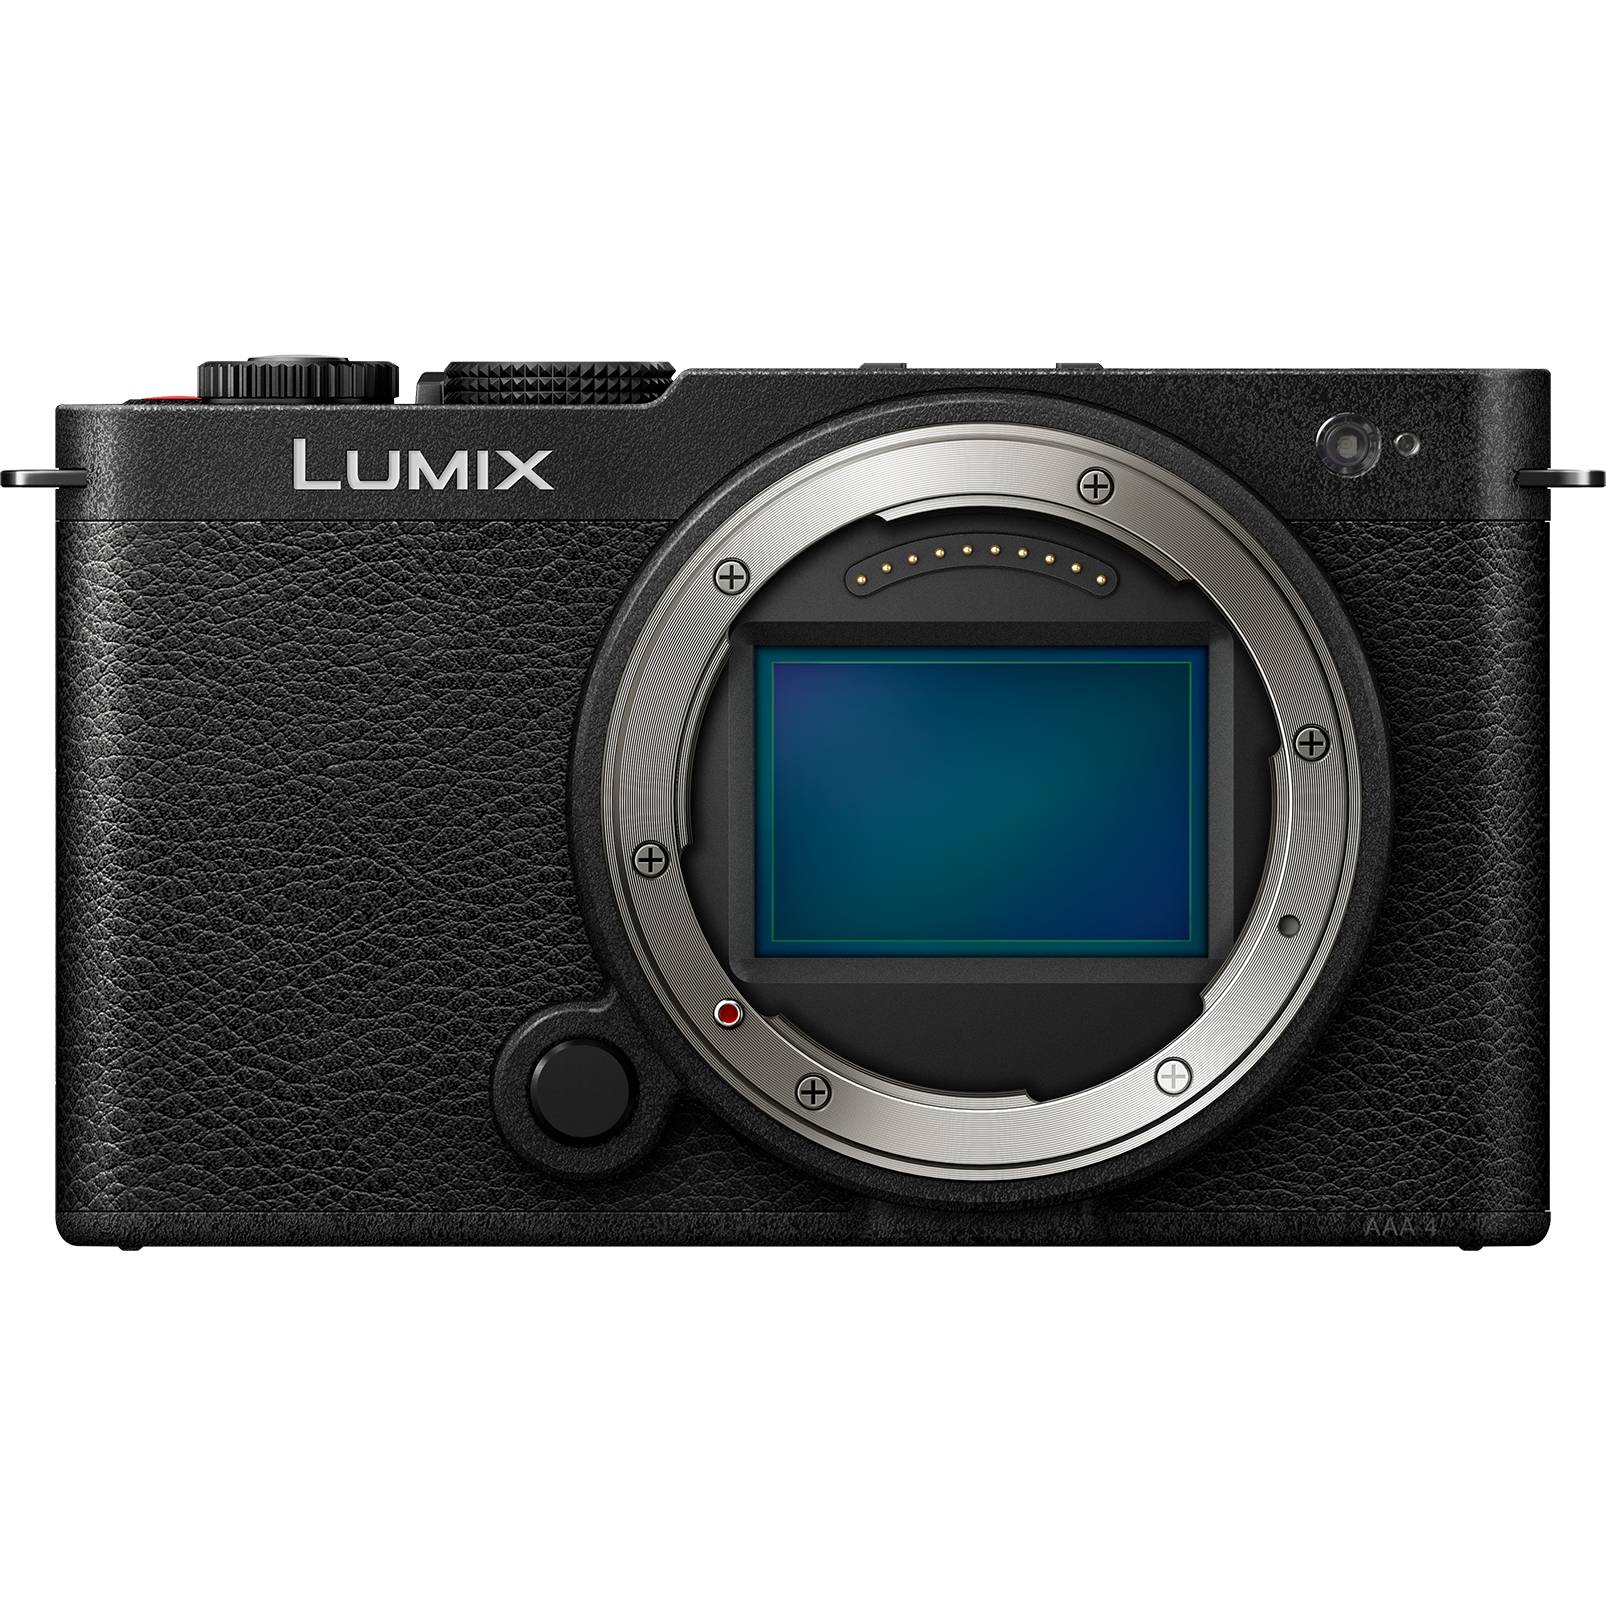 Discover the Power of Compact Photography with the LUMIX S9